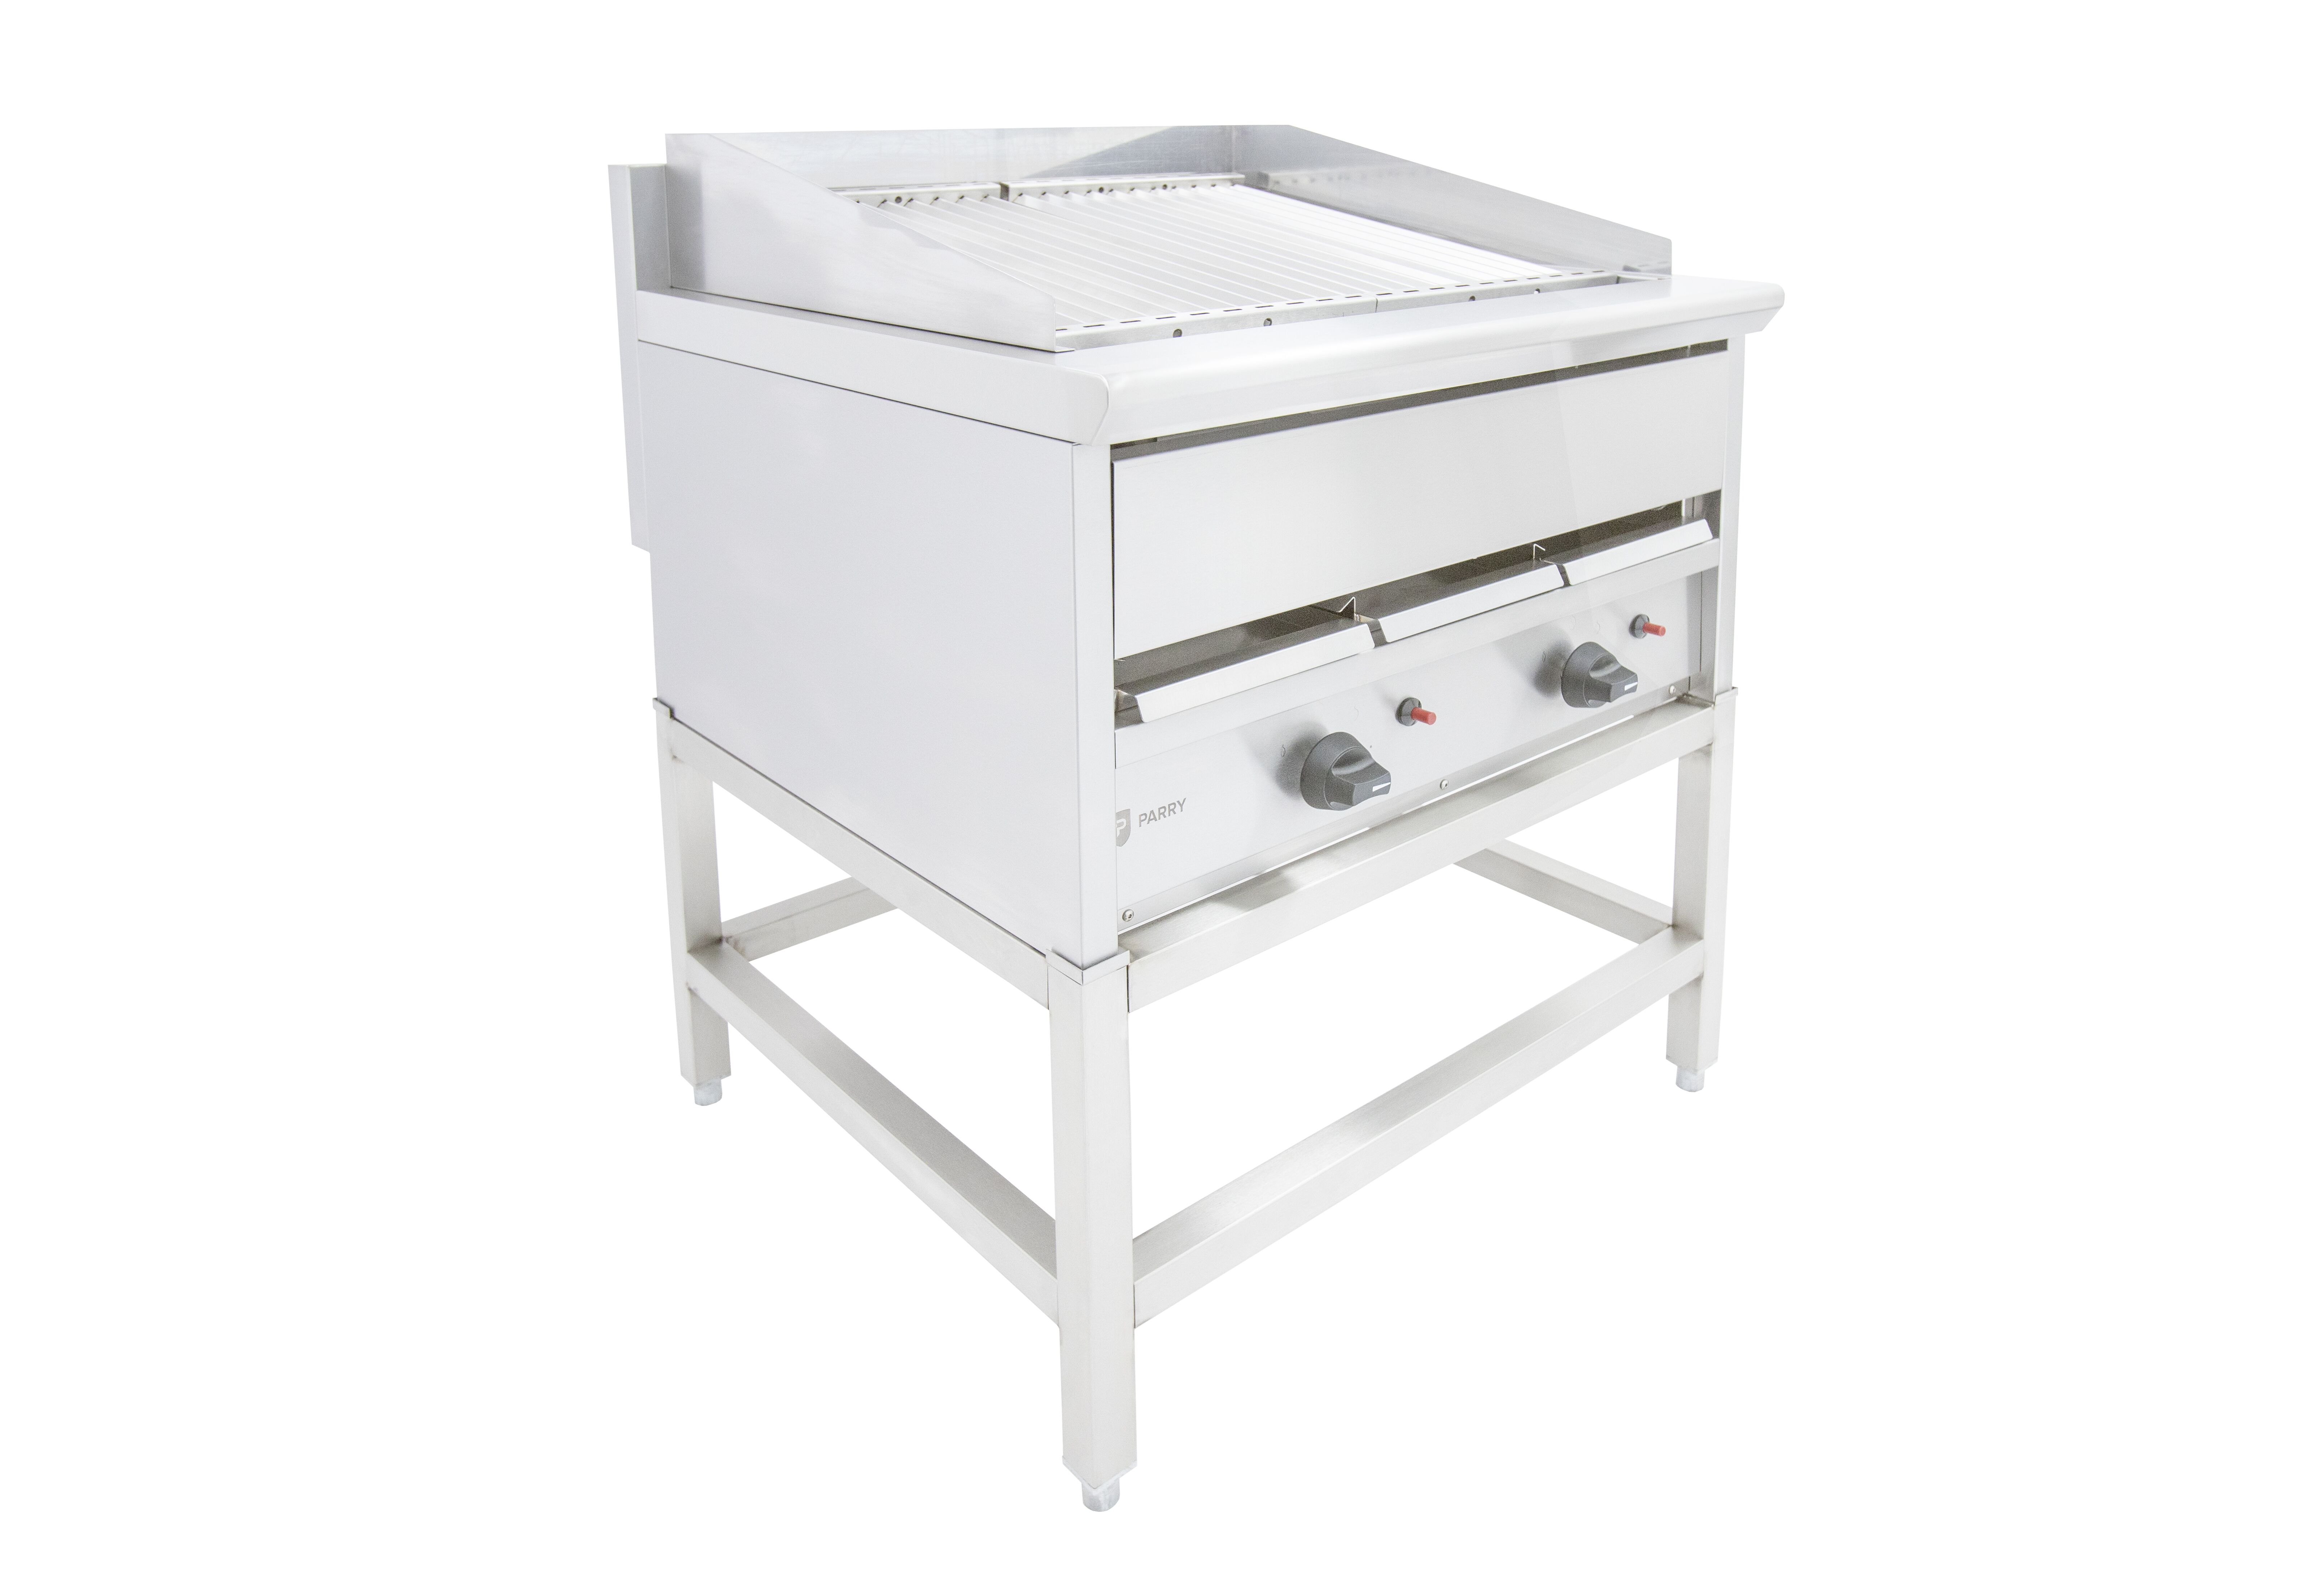 Parry UGC8 - Freestanding Gas Radiant Chargrill